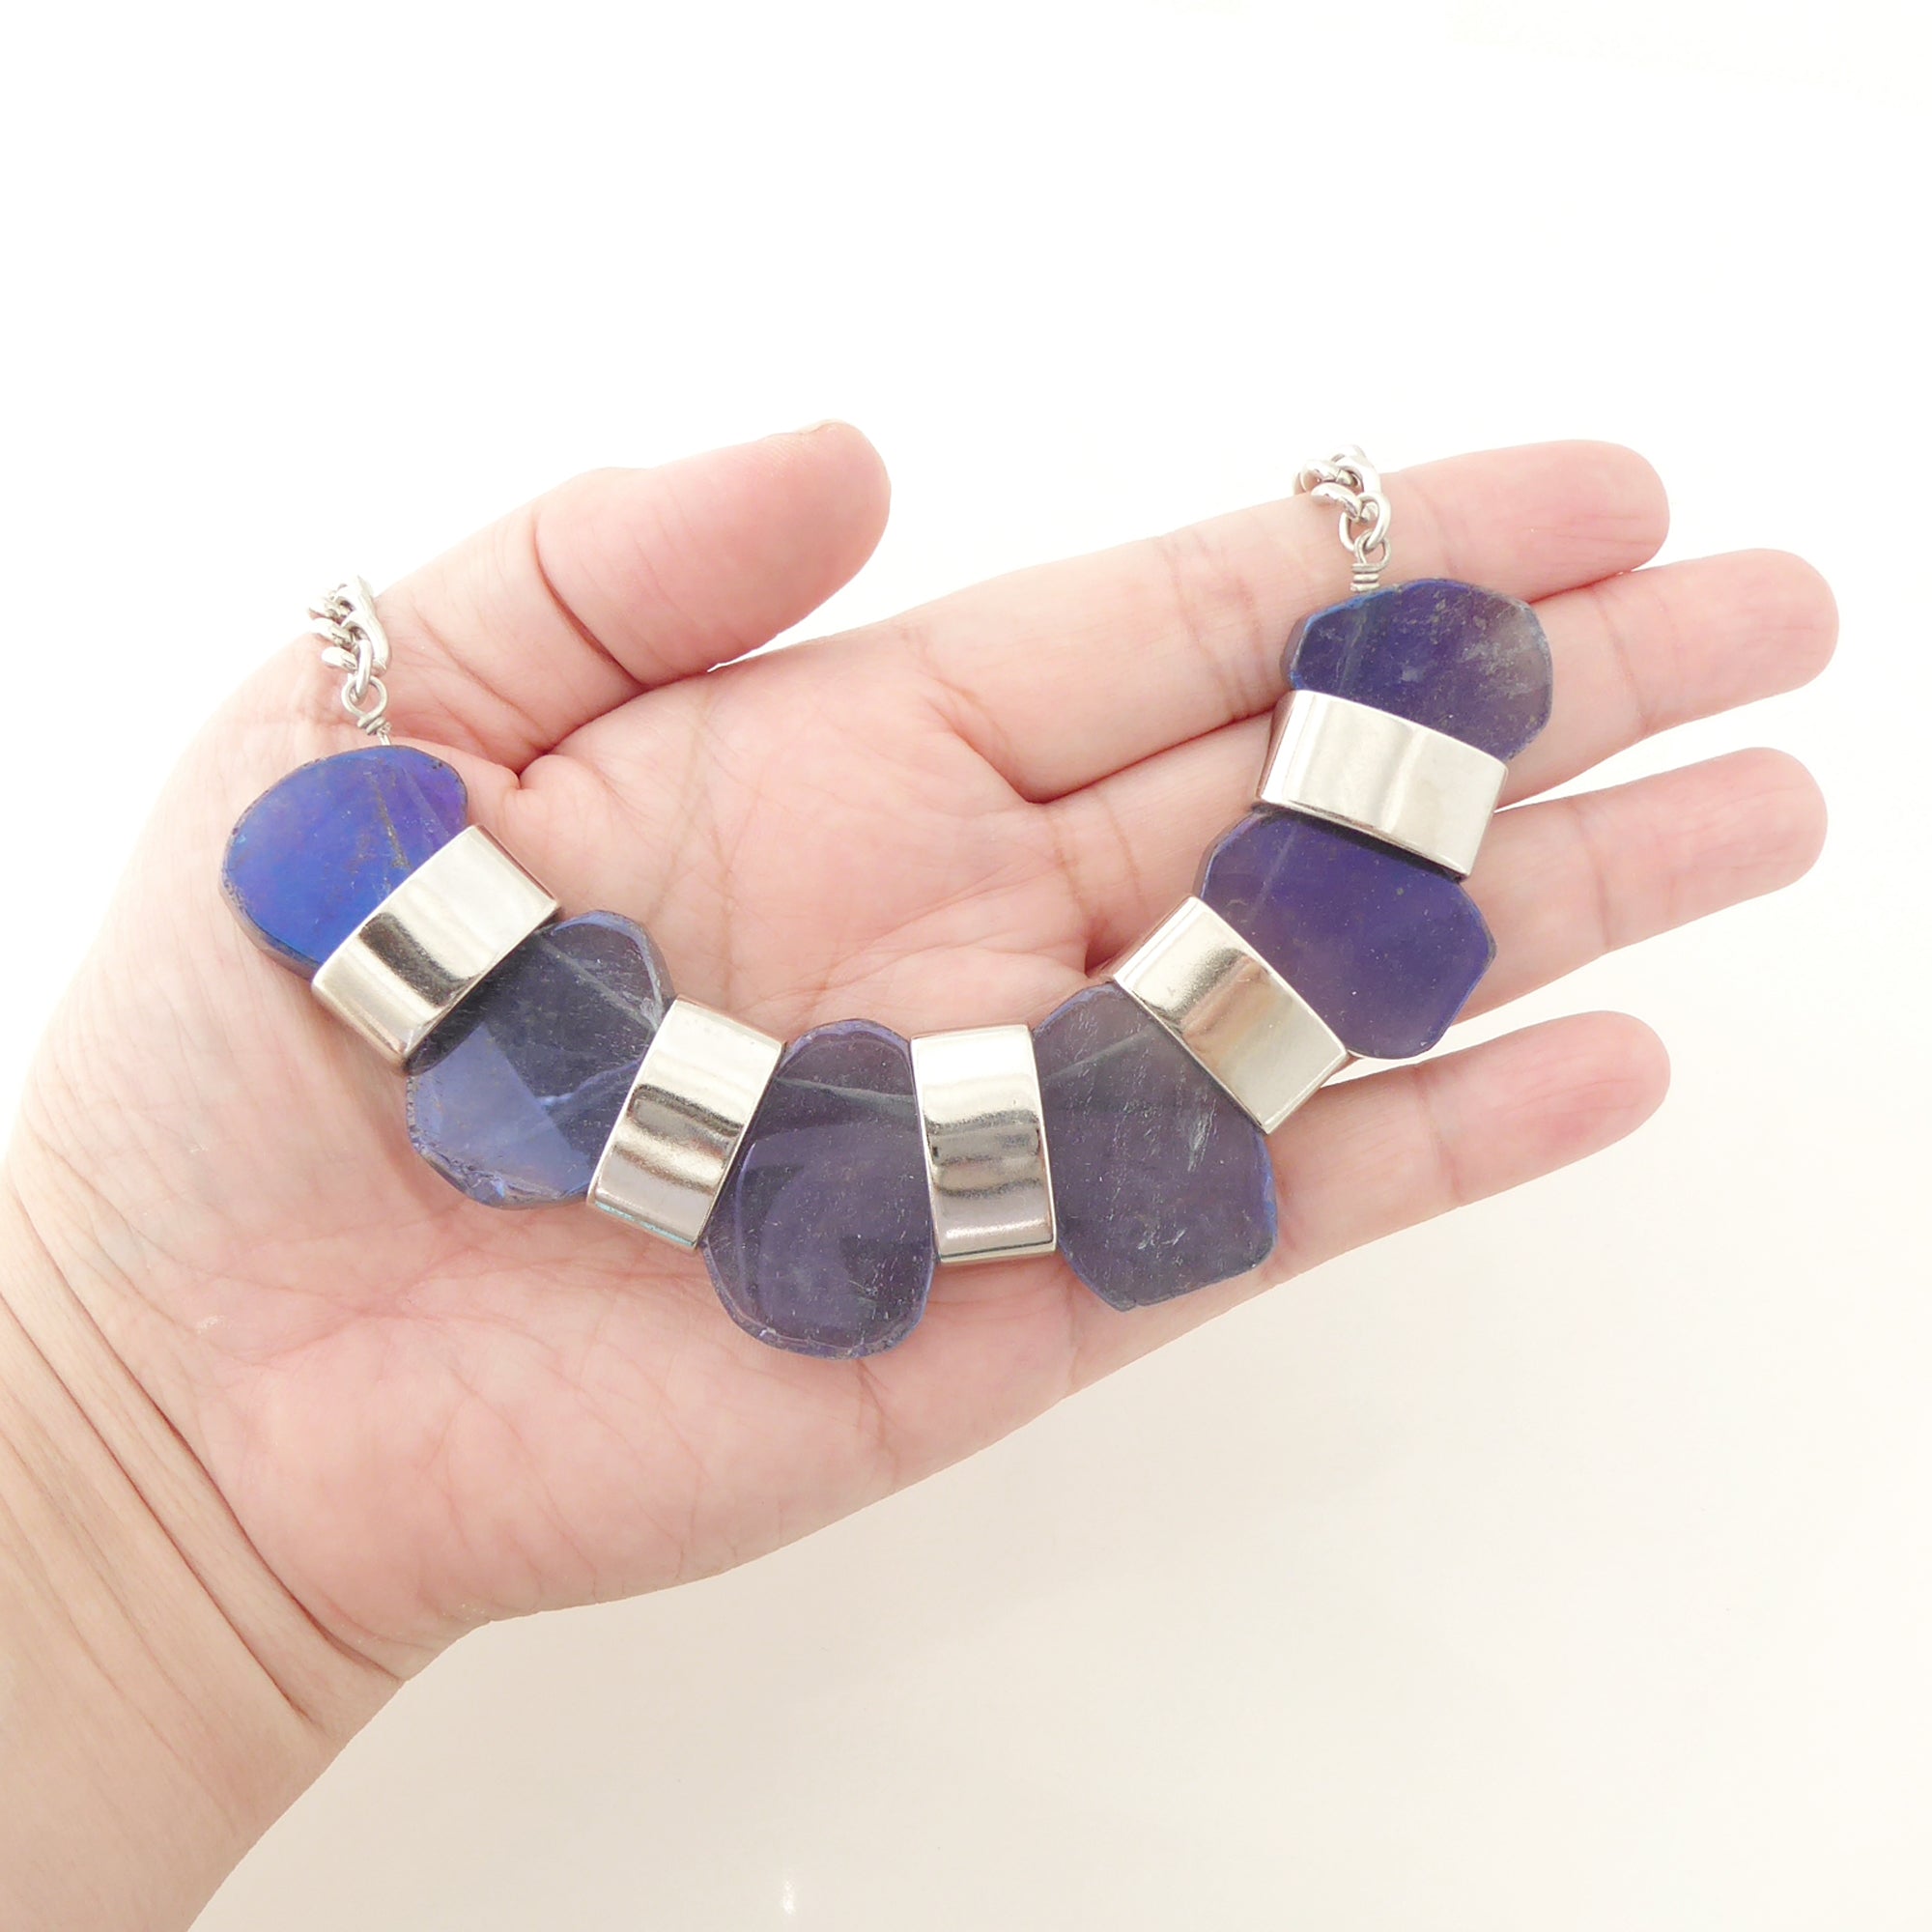 Iridescent blue agate necklace by Jenny Dayco 5